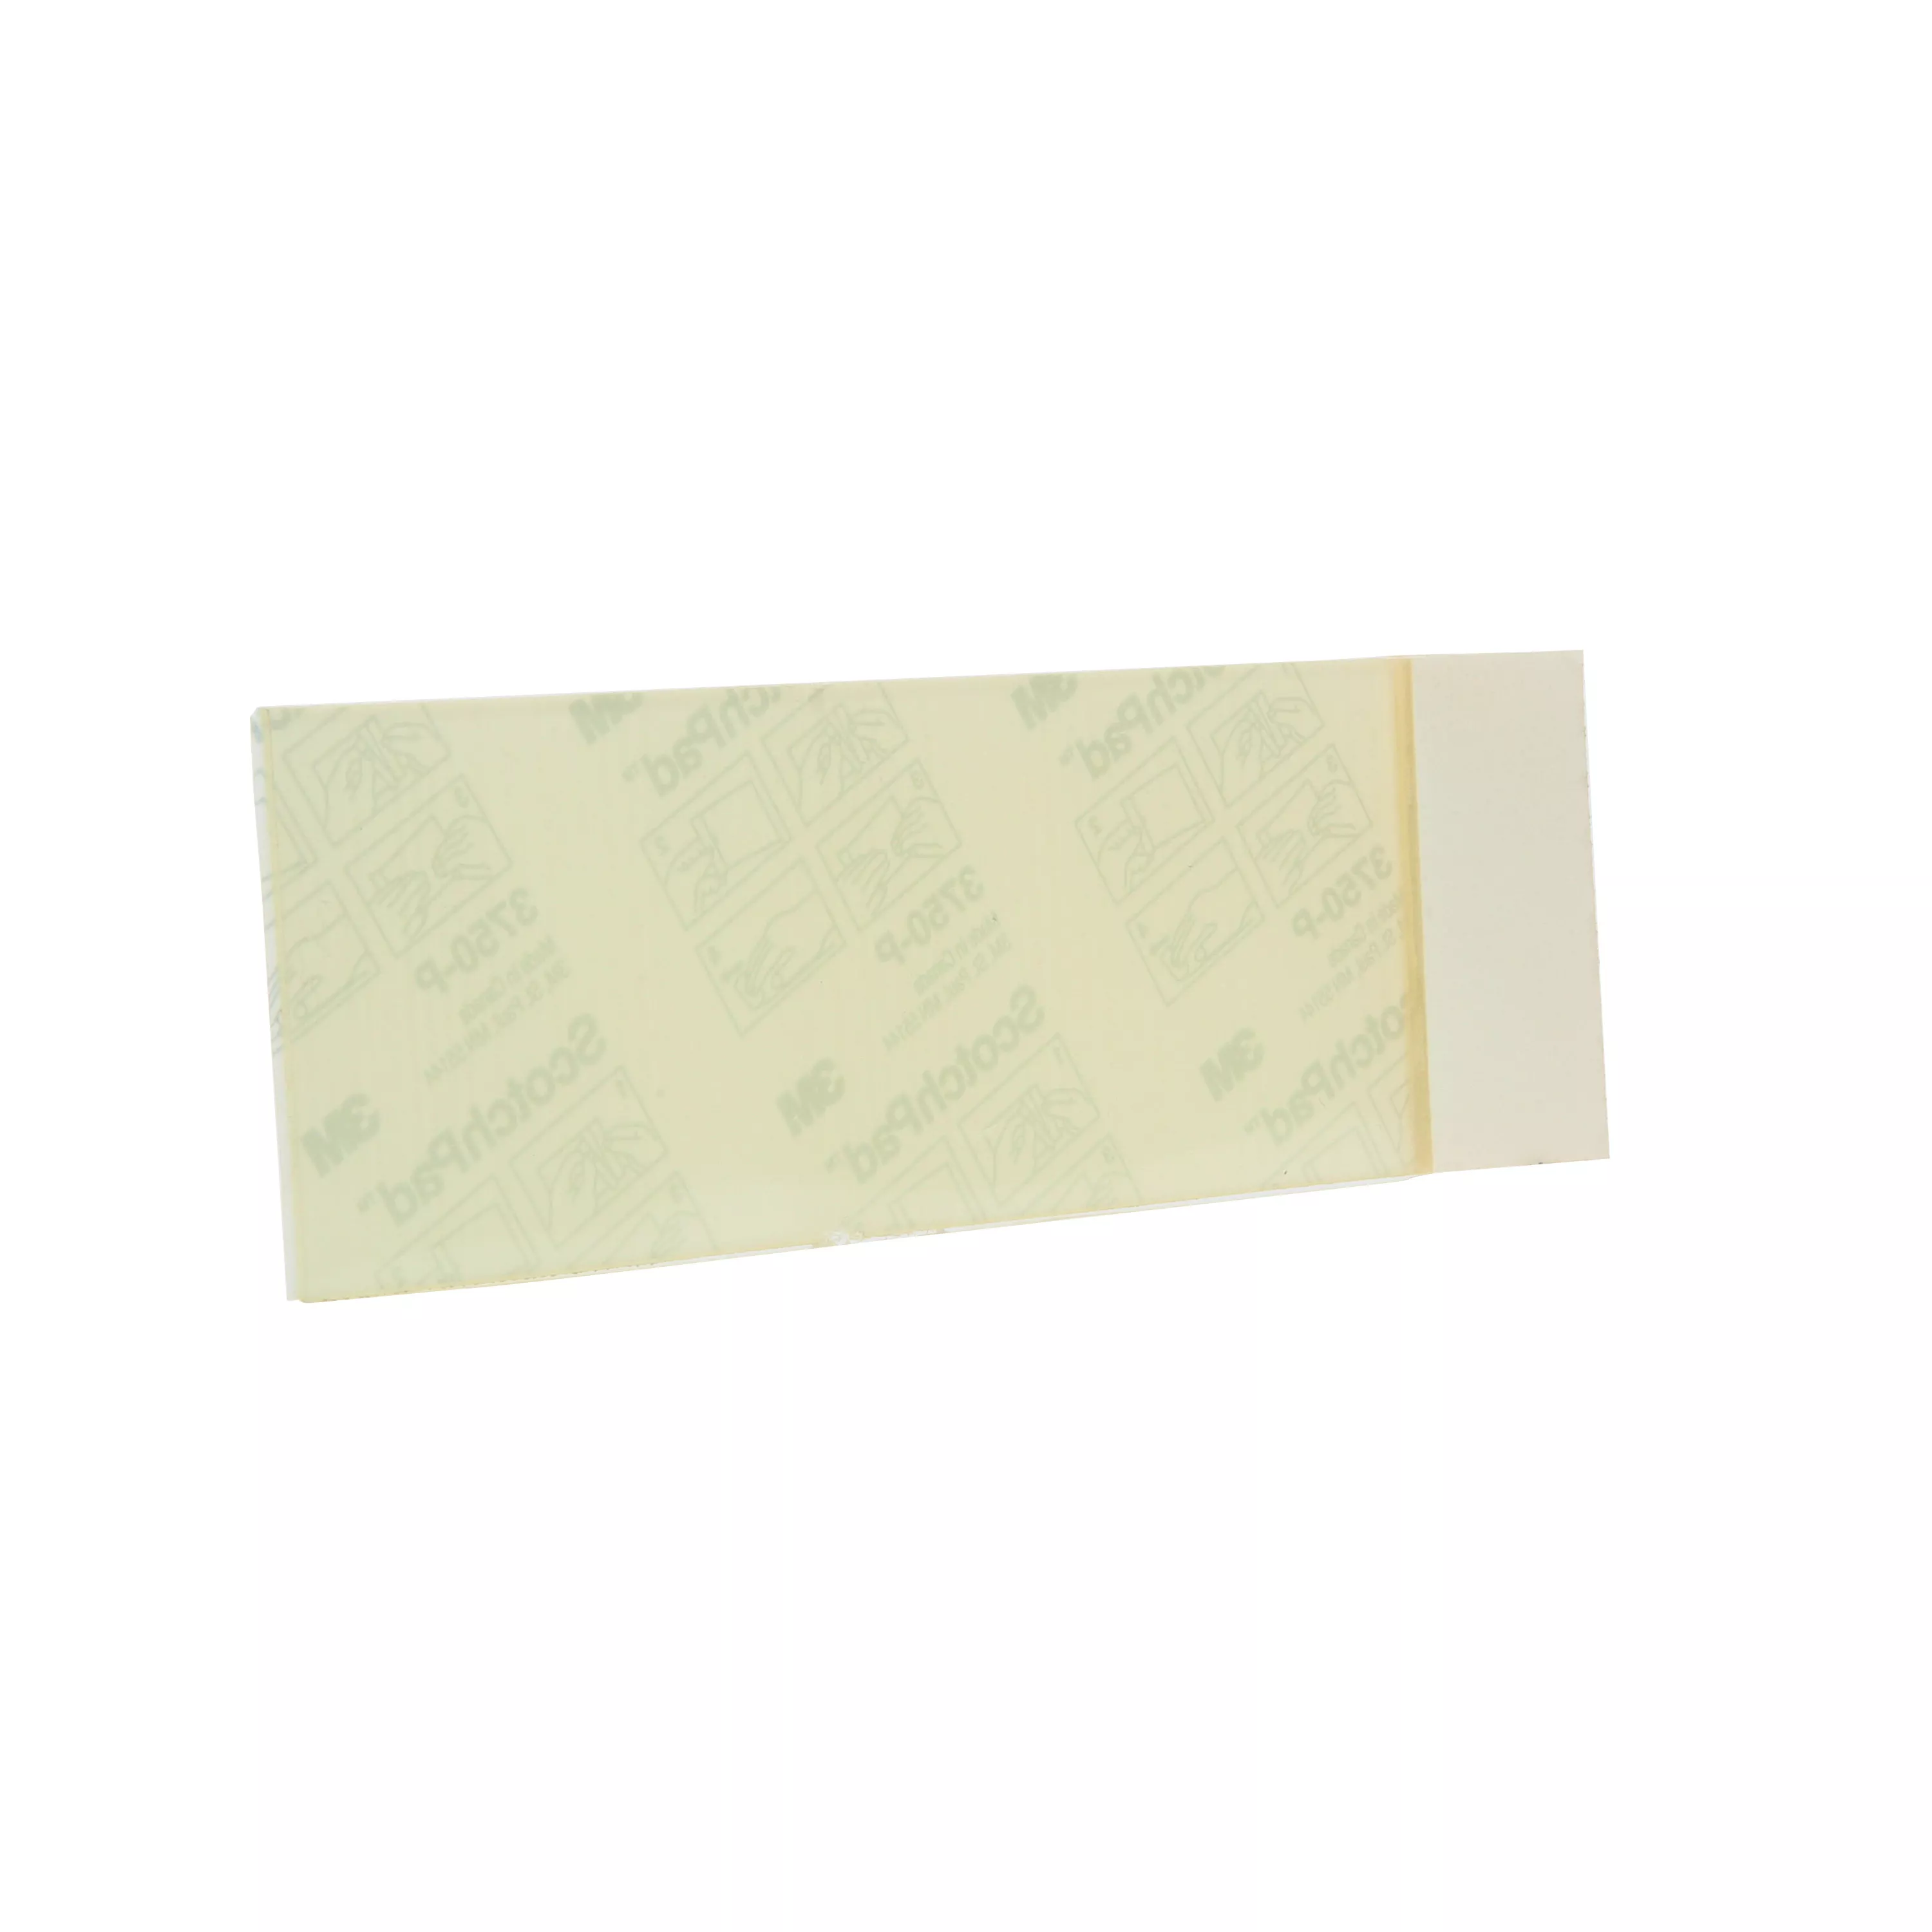 3M™ Tape Sheets 3750P, Clear, 2 in x 6 in, 5 Pack/Case, Conveniently
Packaged